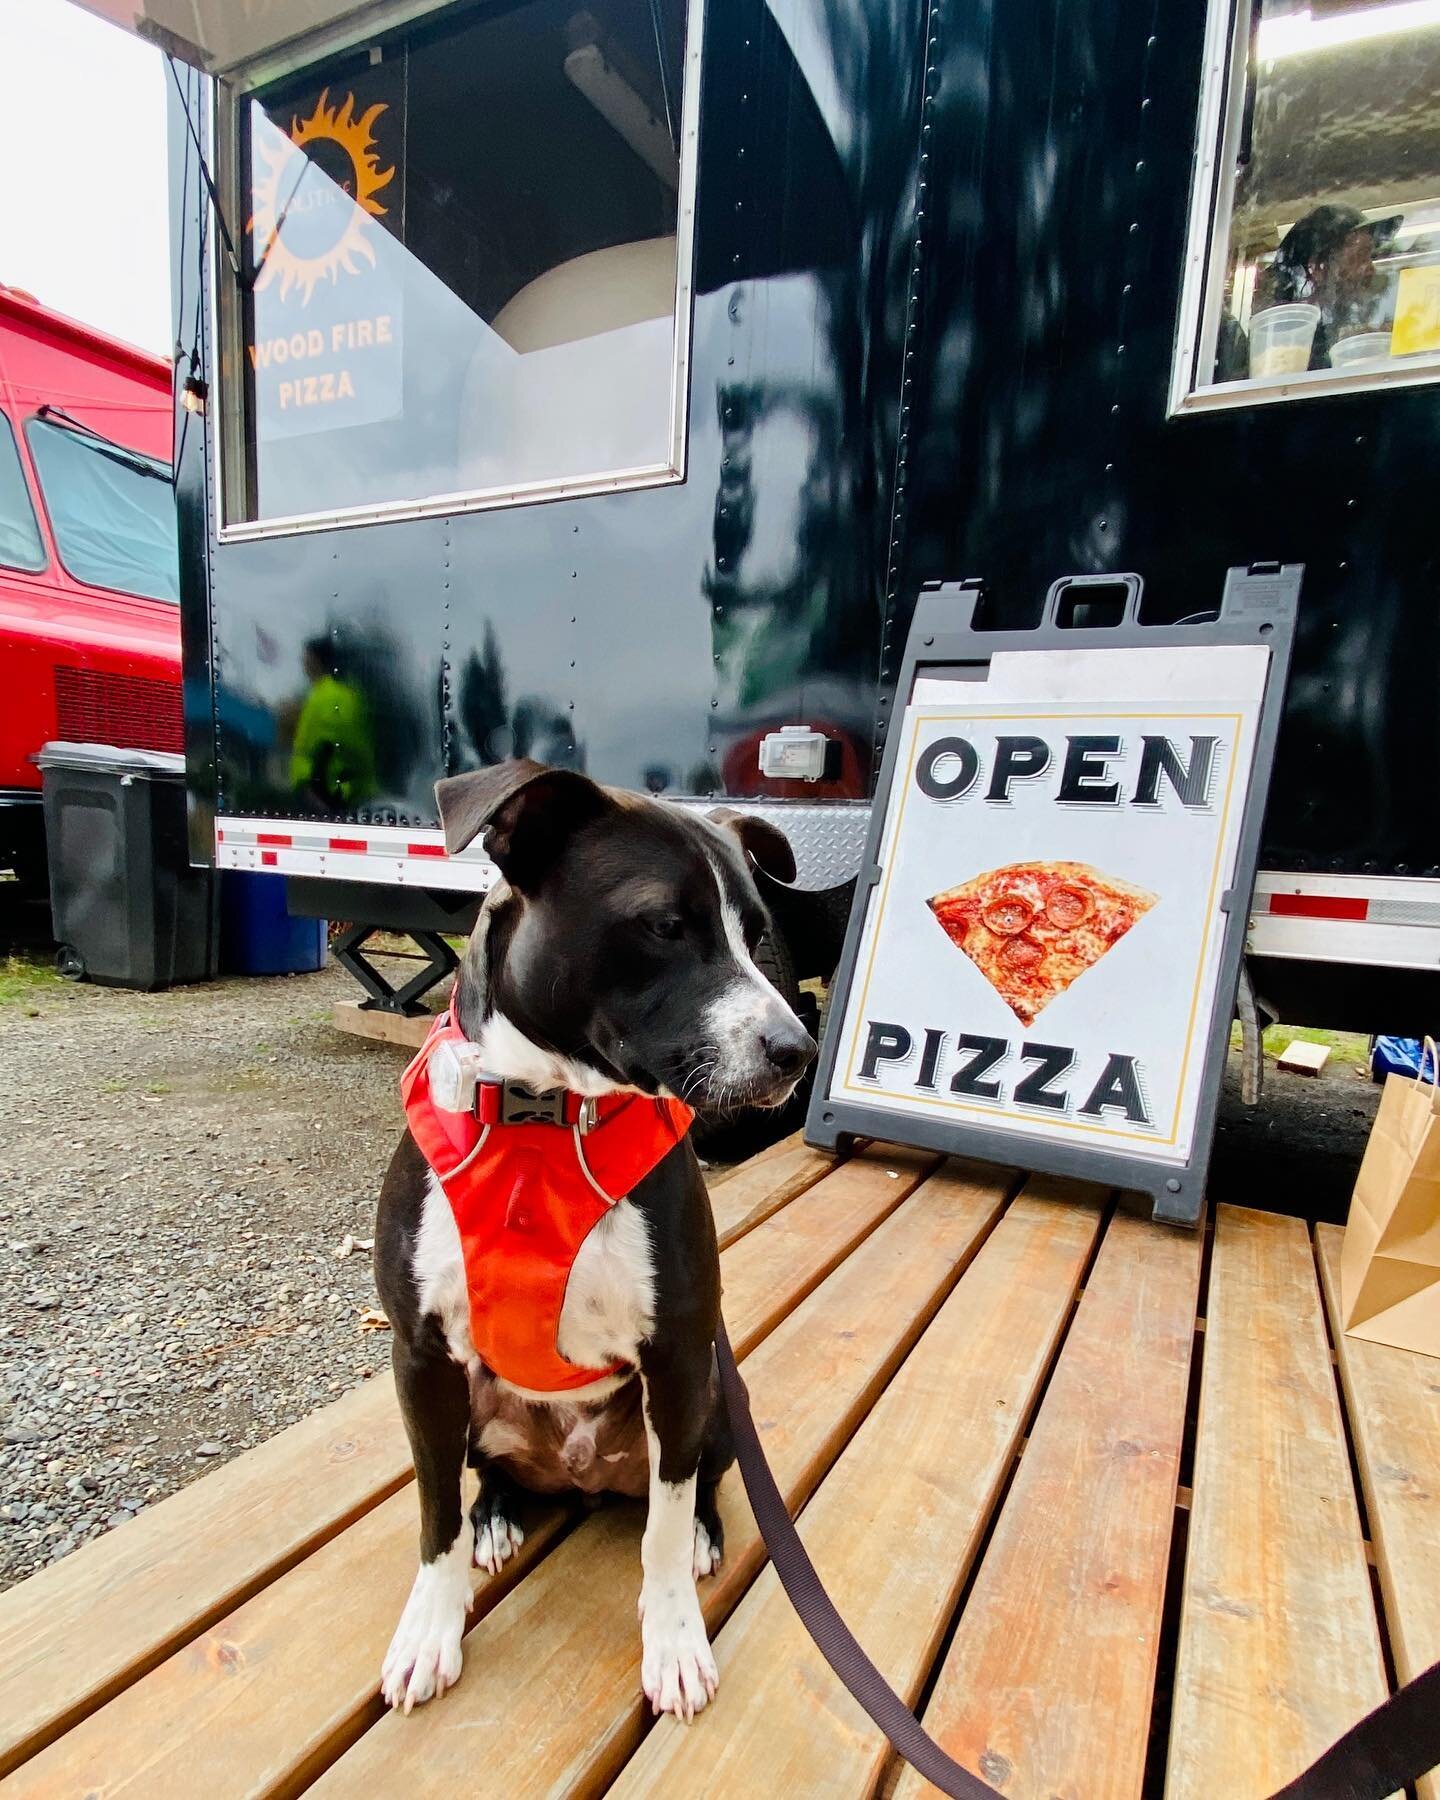 Boba Fett Dog Boy says: &ldquo;There&rsquo;s a break in the rain, let&rsquo;s walk the trail to the pizza truck!&rdquo; 🐶🍕🚚⁣
⁣
𝘖𝘳𝘥𝘦𝘳 𝘢𝘩𝘦𝘢𝘥 𝘰𝘯𝘭𝘪𝘯𝘦! ⁣
⁣
https://www.toasttab.com/solstice-wood-fire-pizza-food-truck-hood-river-heights/